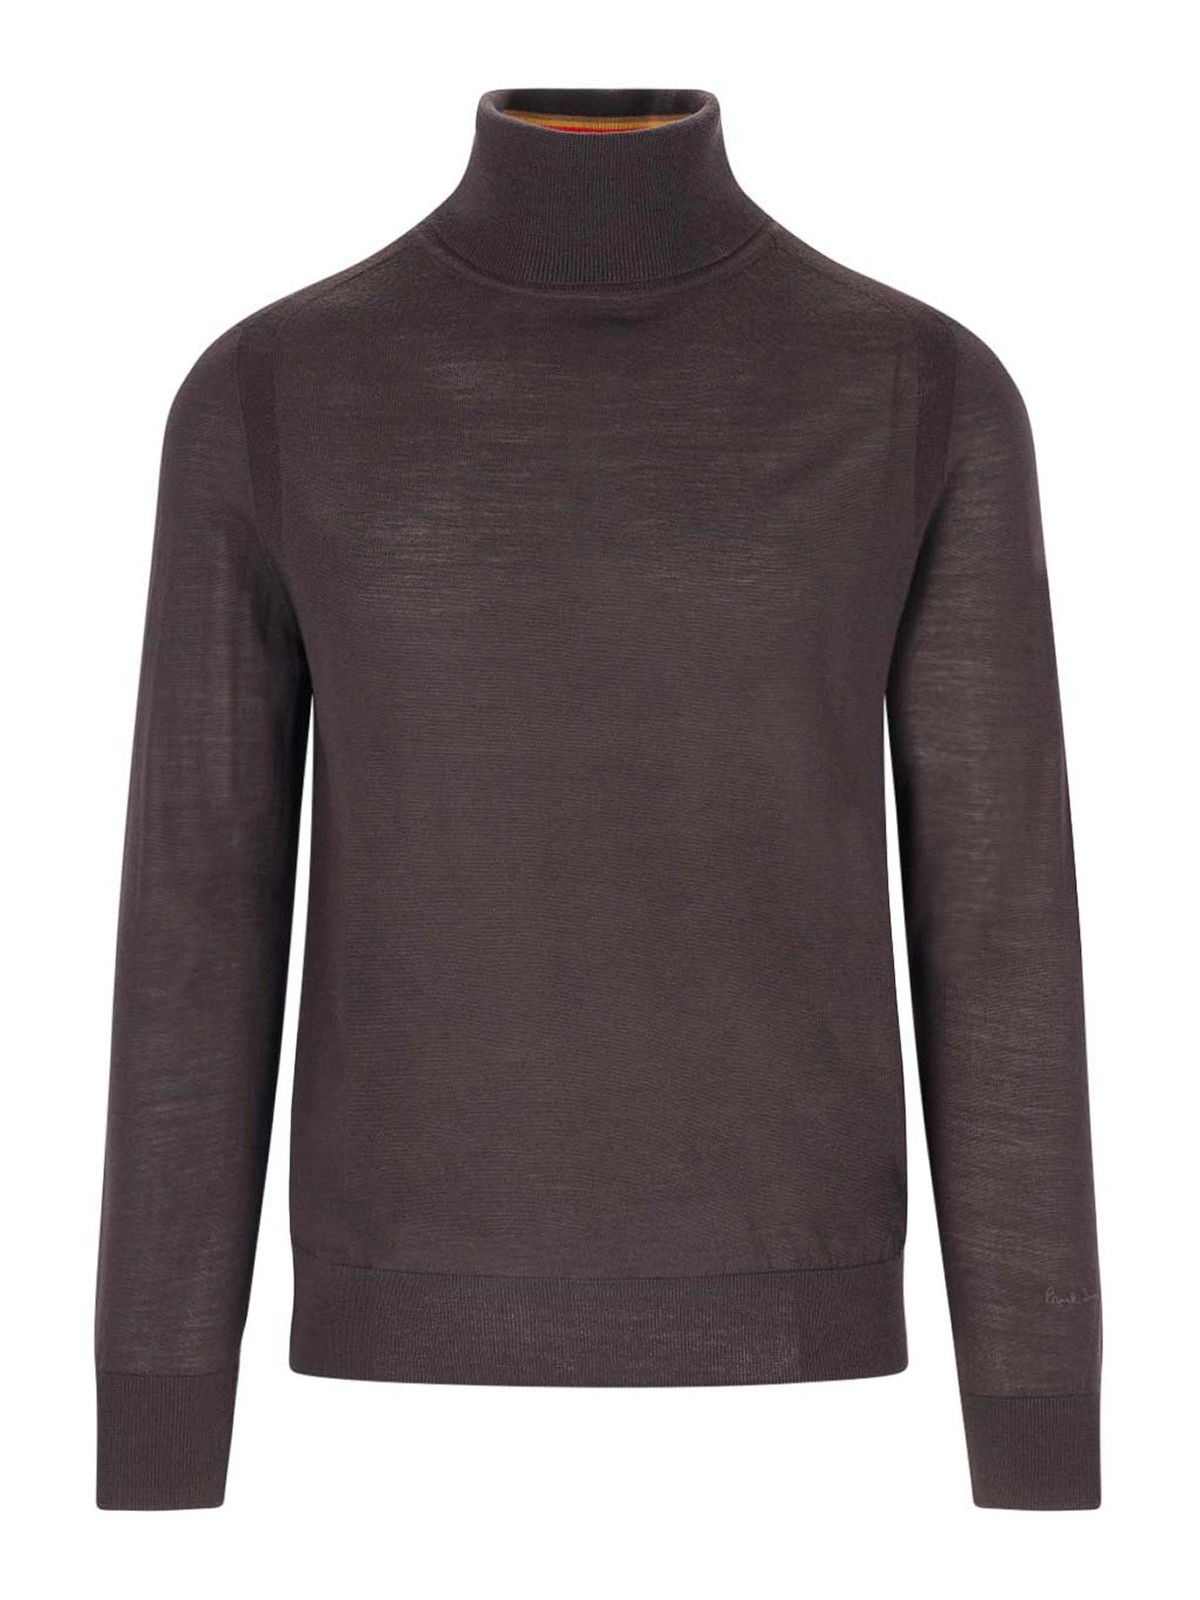 Paul Smith Turtleneck Sweater In Brown